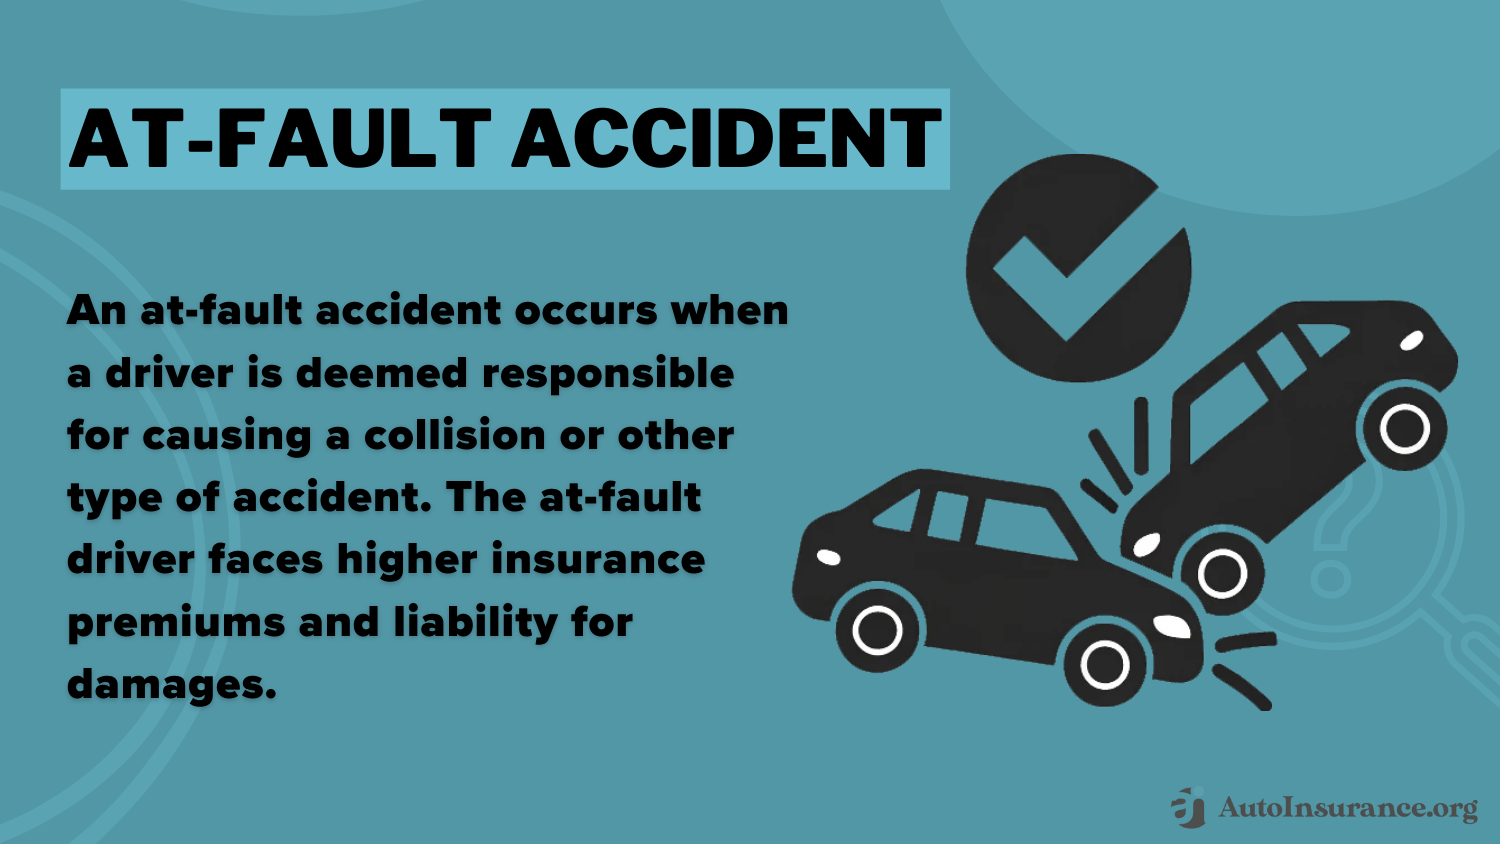 what is an at-fault accident?